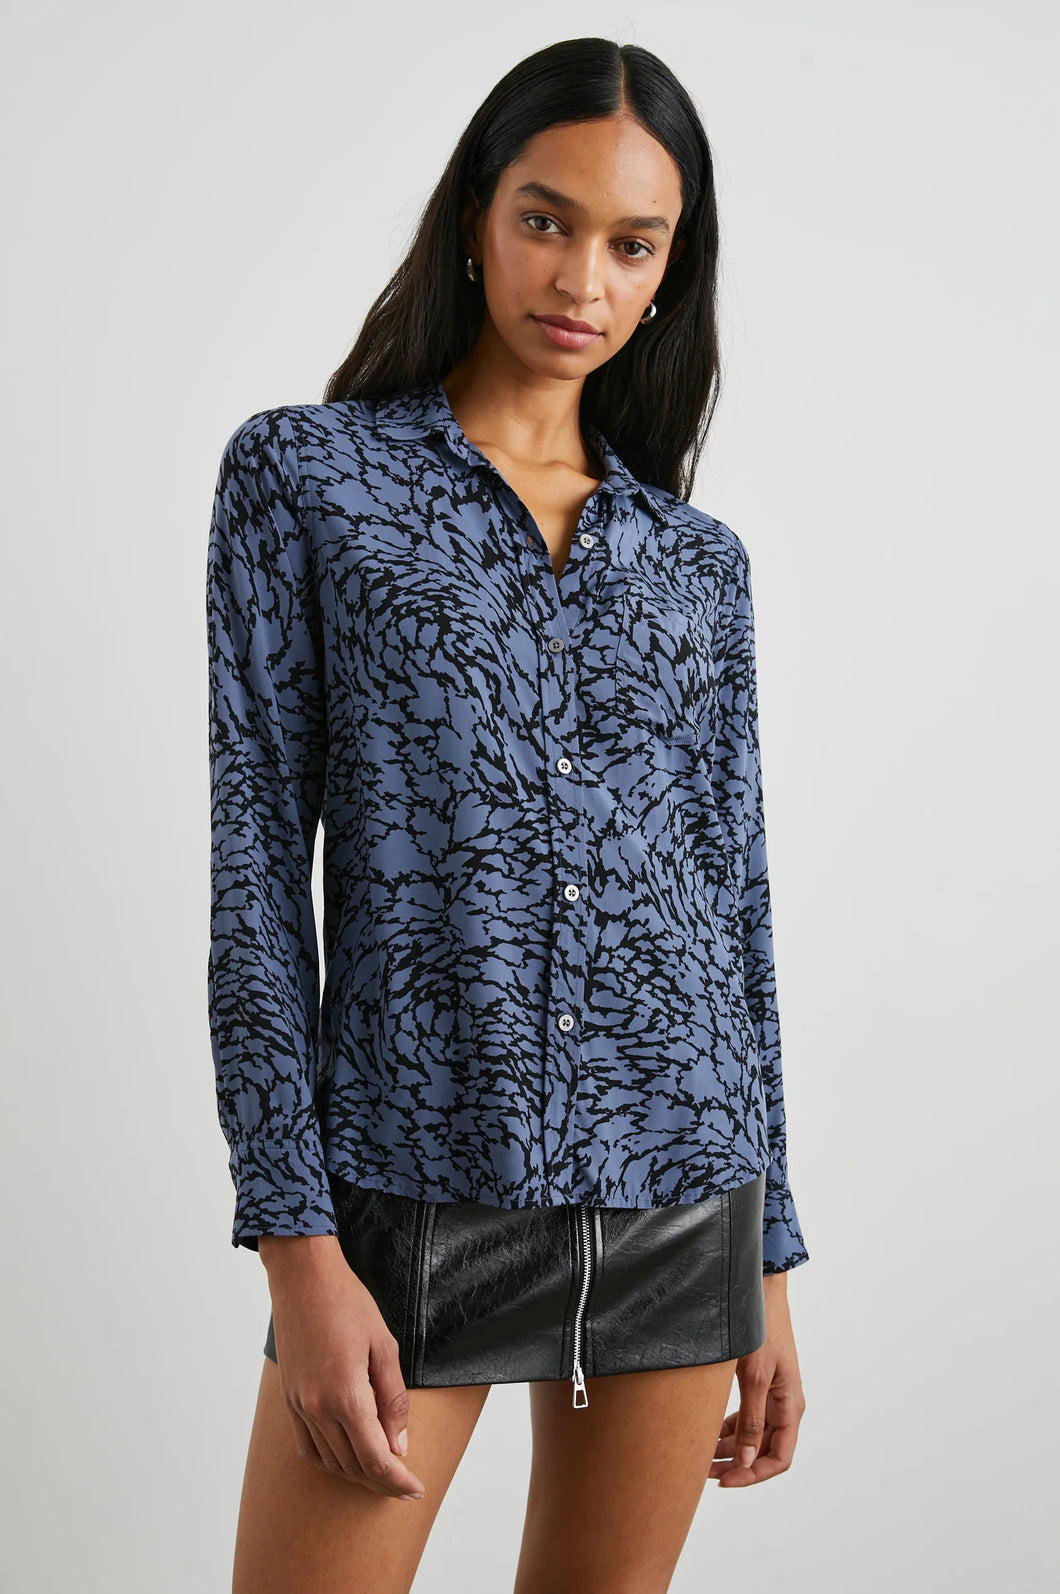 RAILS JOSEPHINE BUTTON-UP SHIRT - JAGGED MARBLE